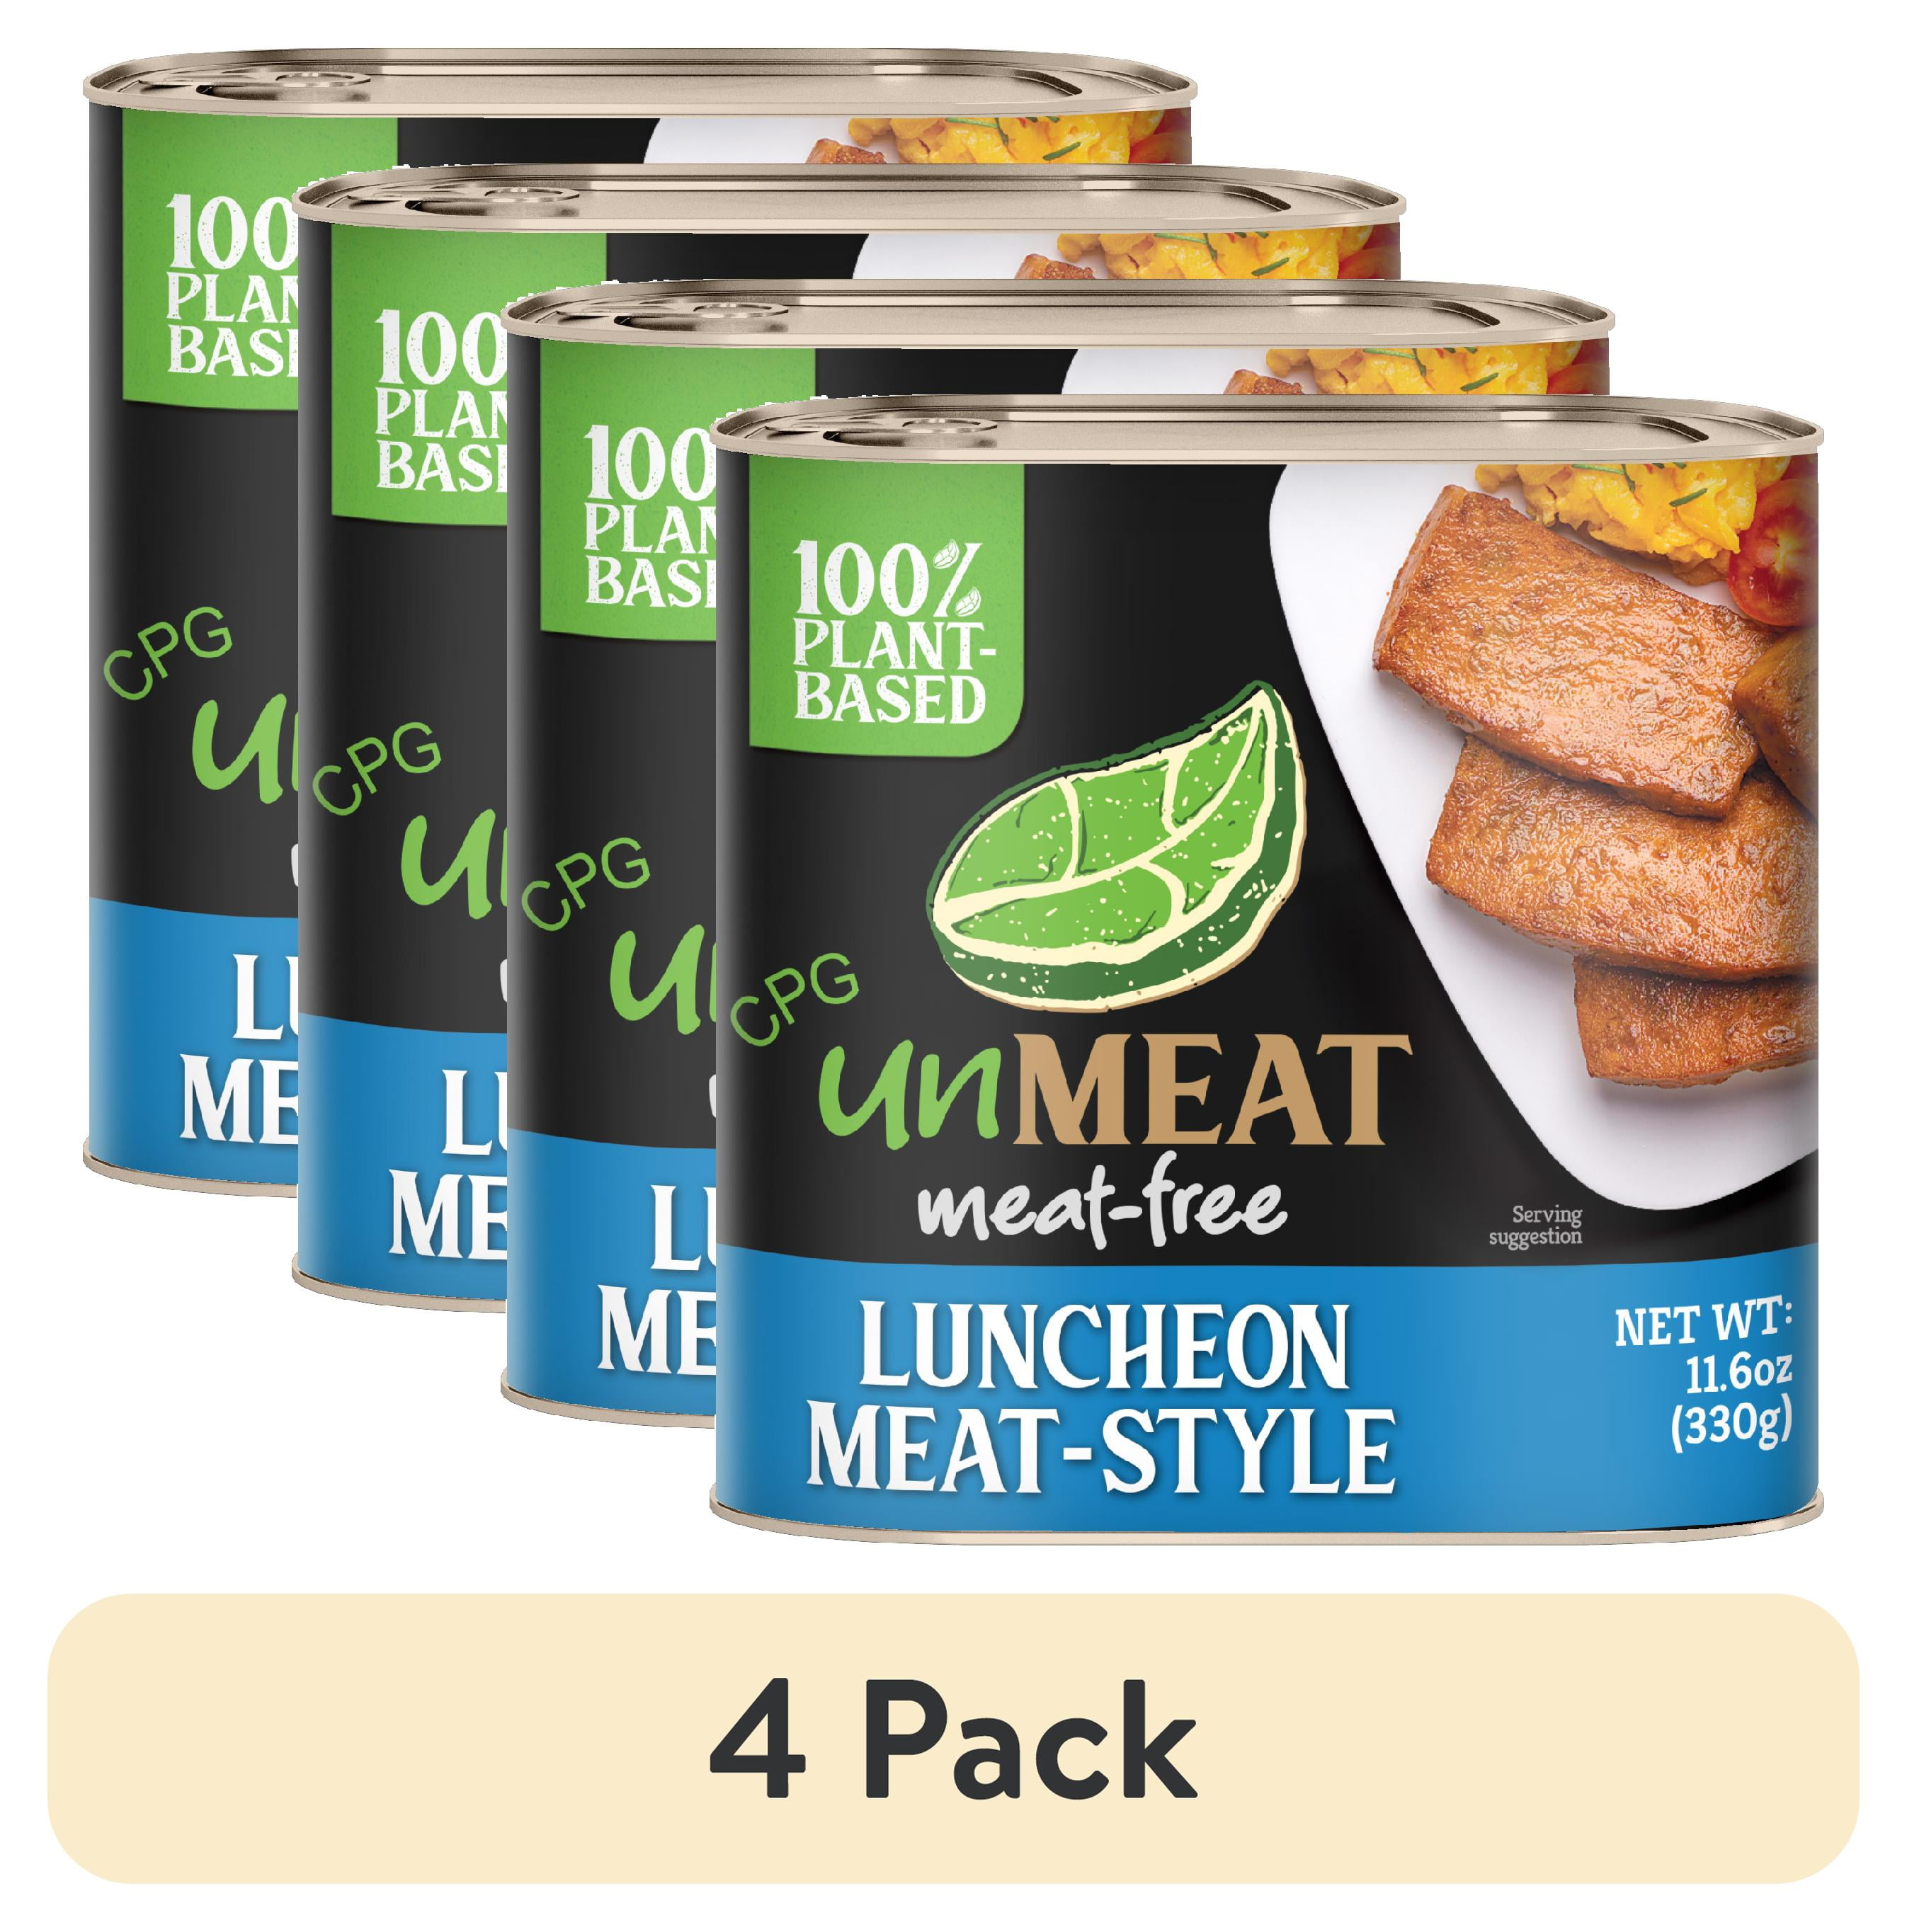 Students sample SPAM® products - Meat Science